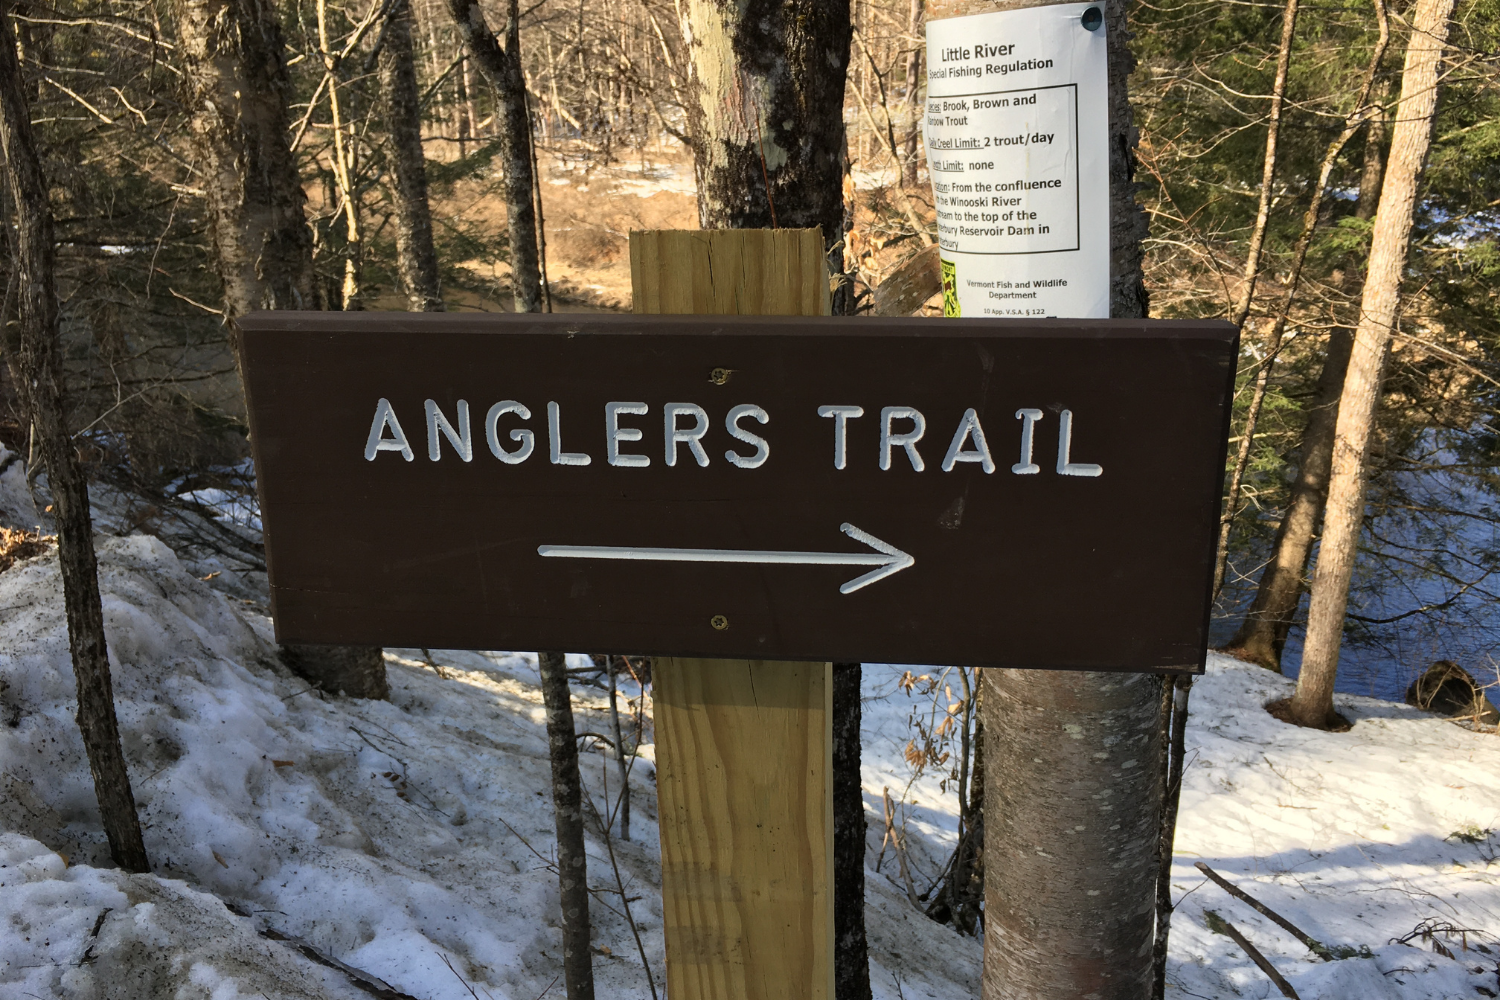 A sign at a trailhead during winter